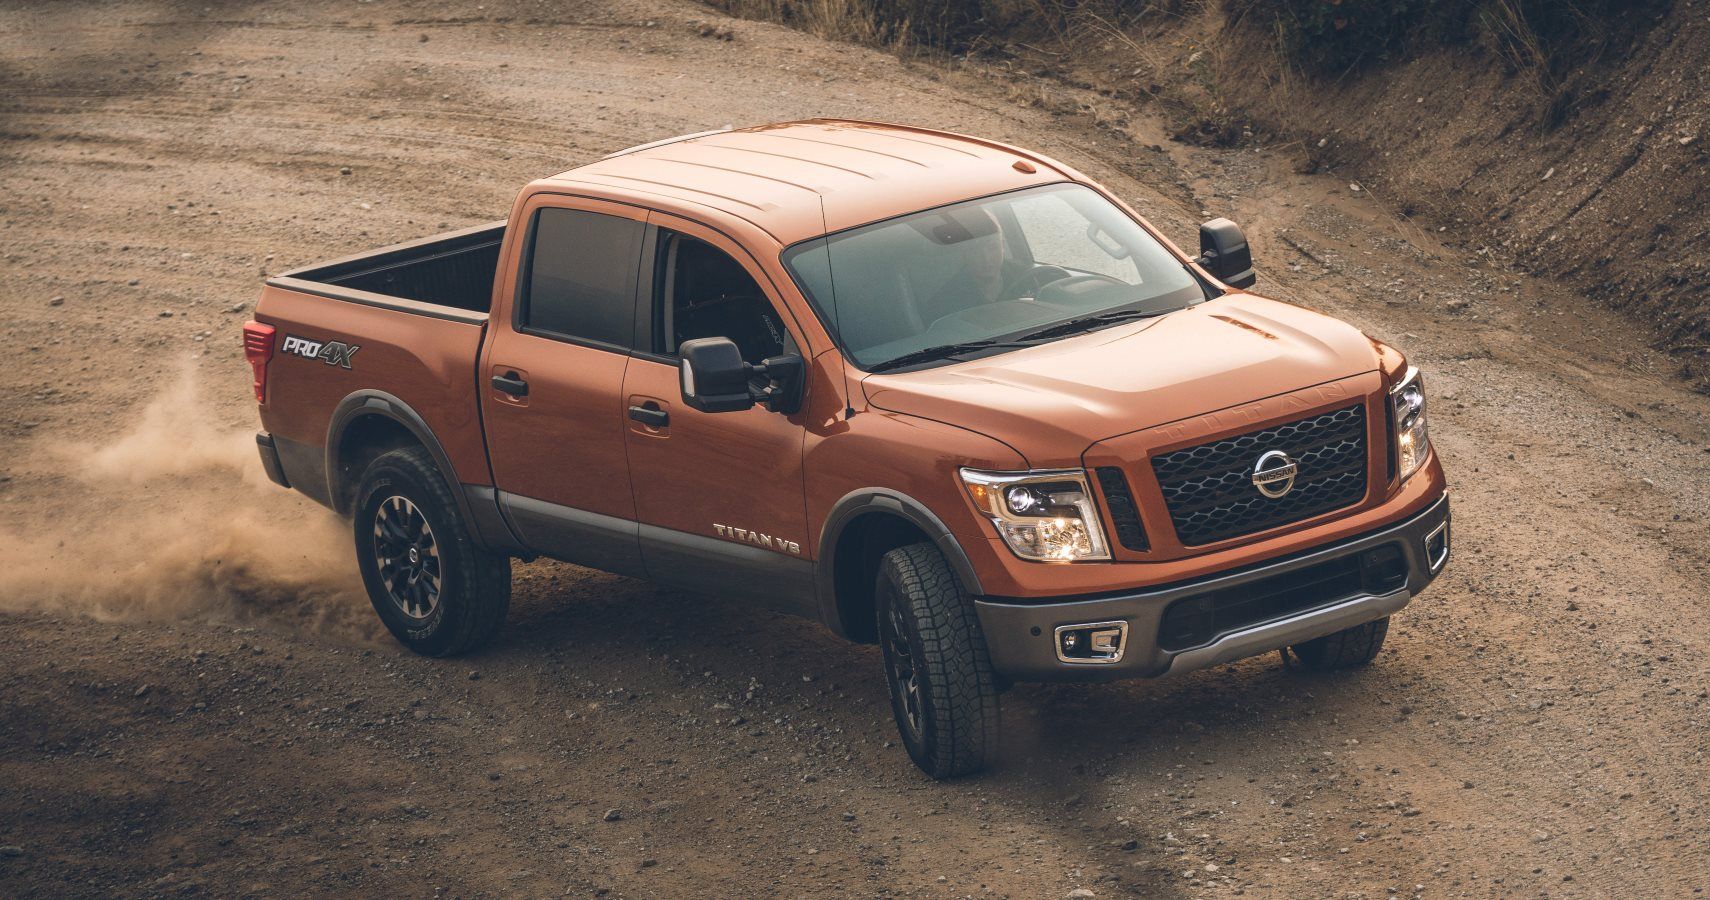 Nissan Has Plans For New Titan, Rogue, And Sentra, But No Juke